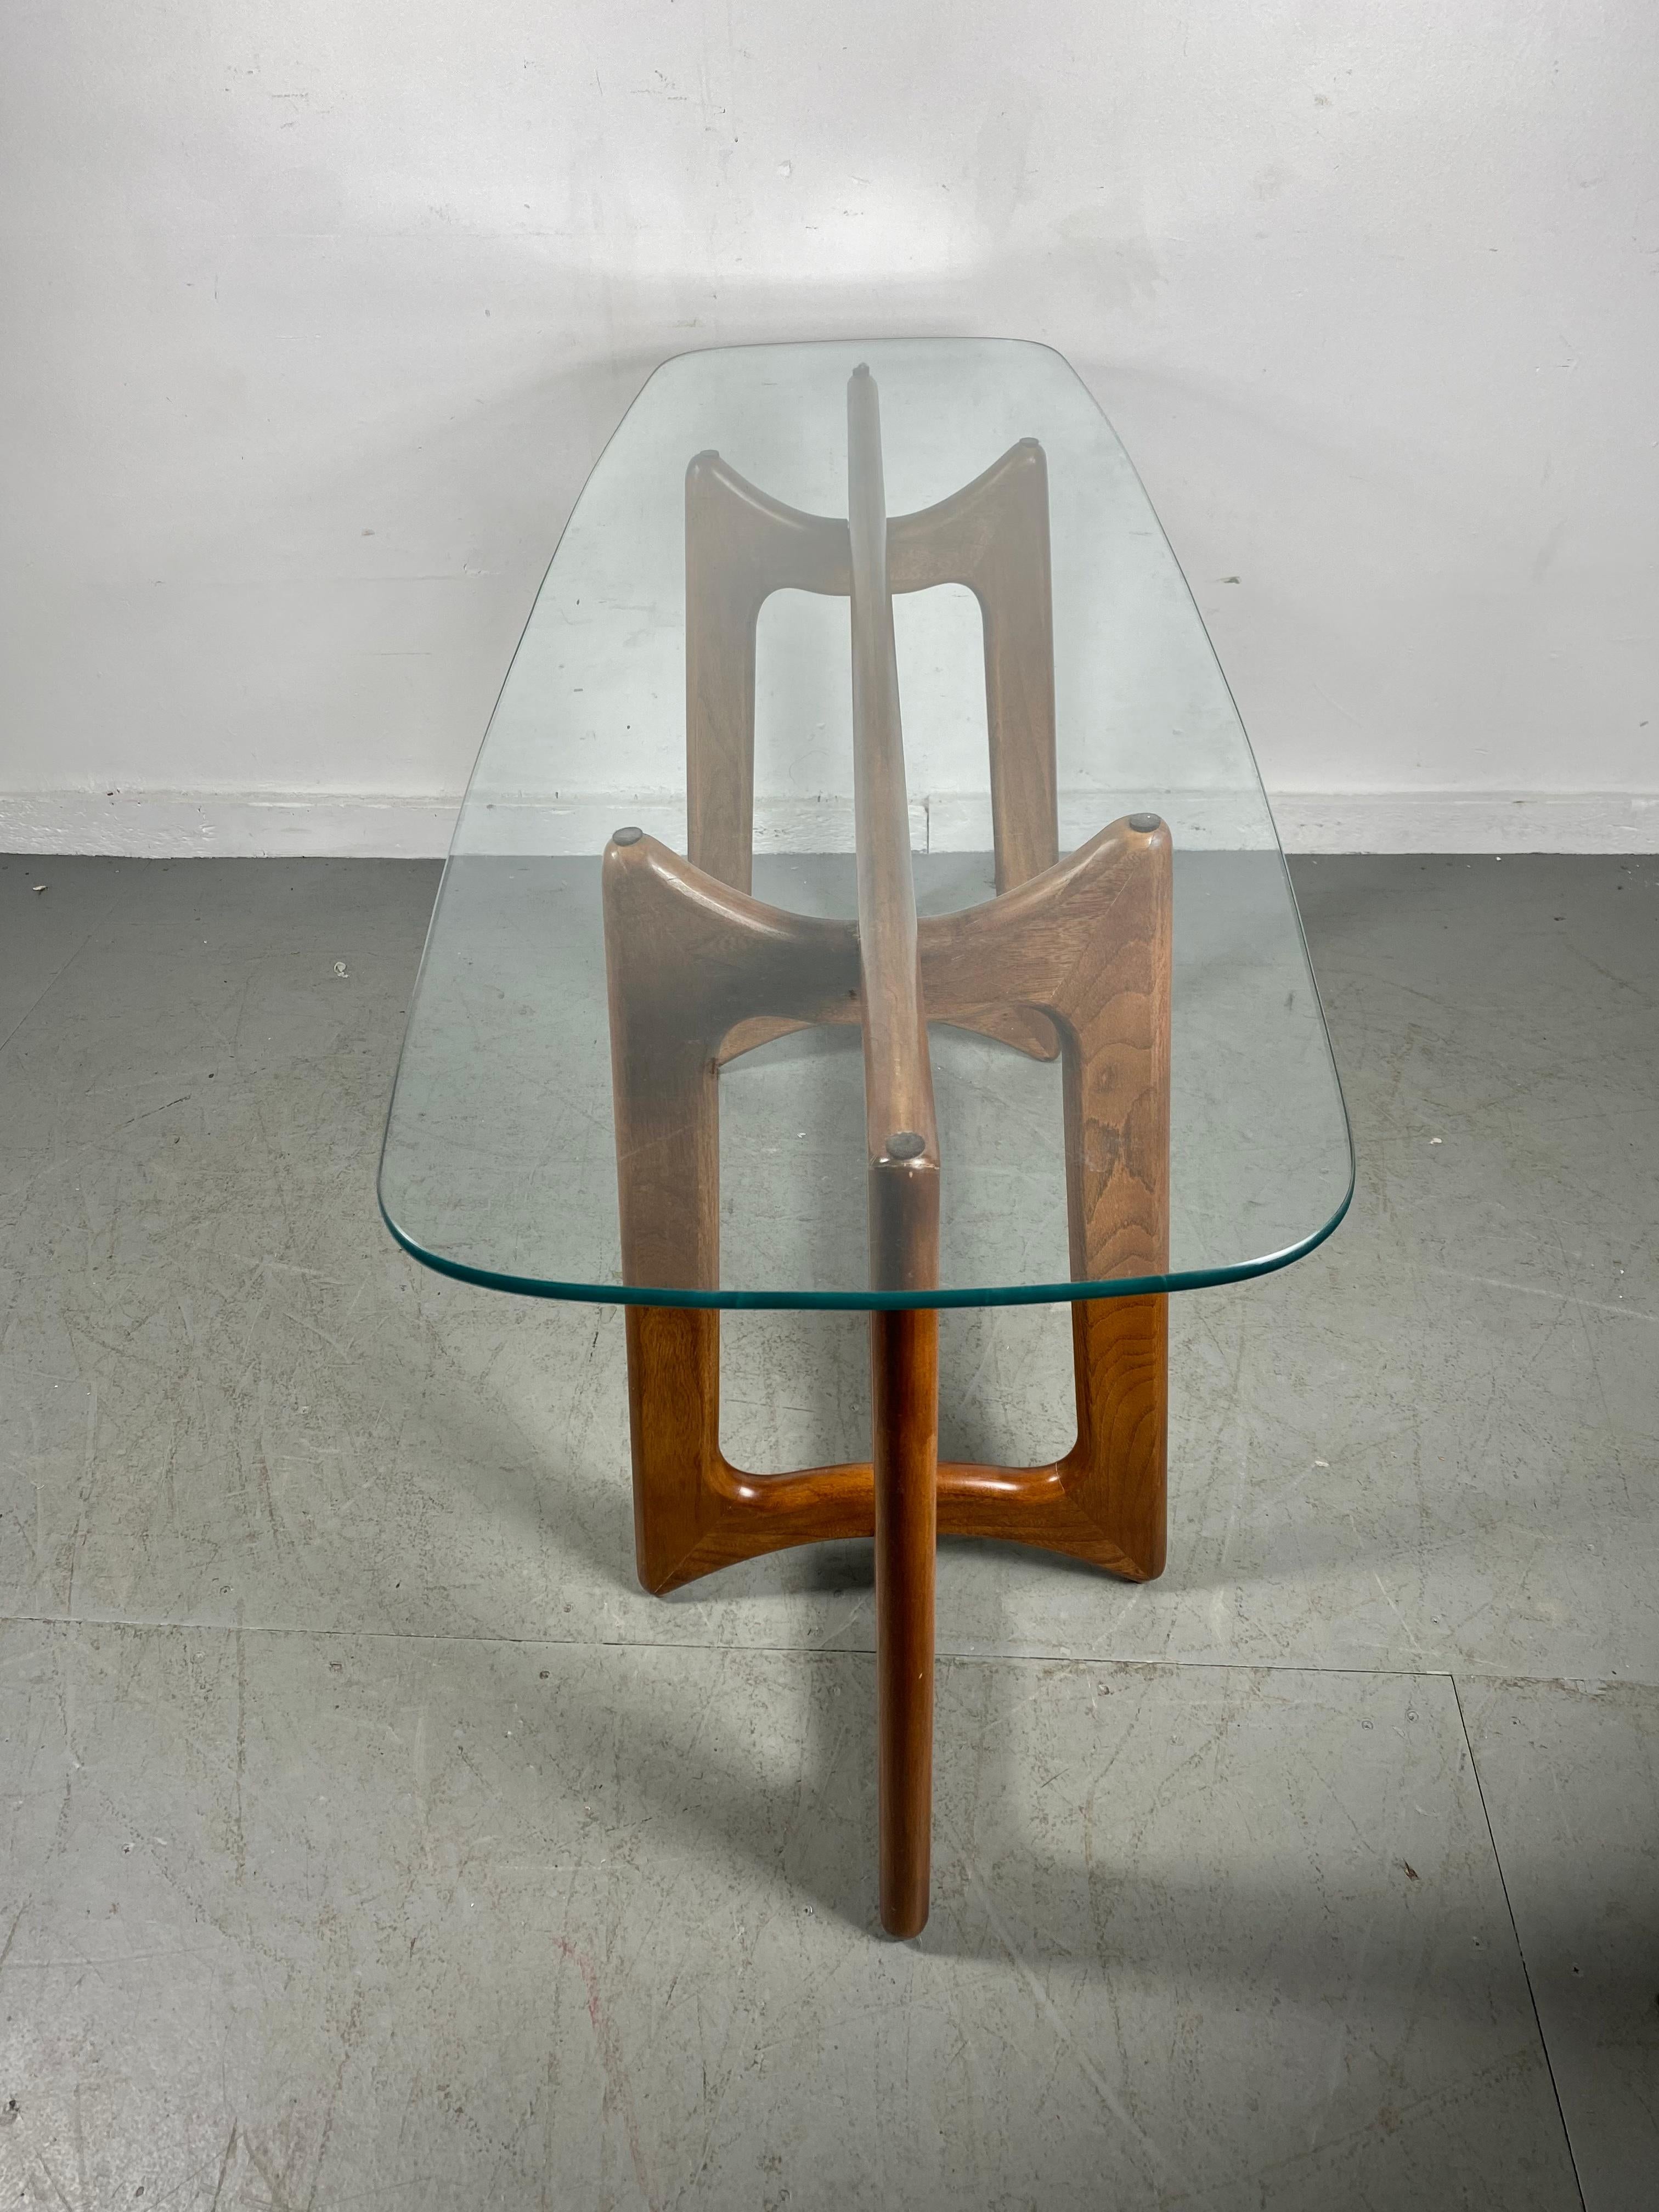 Late 20th Century Adrian Pearsall Bowtie Console Table / Sculptural Walnut, Mid-Century Modern